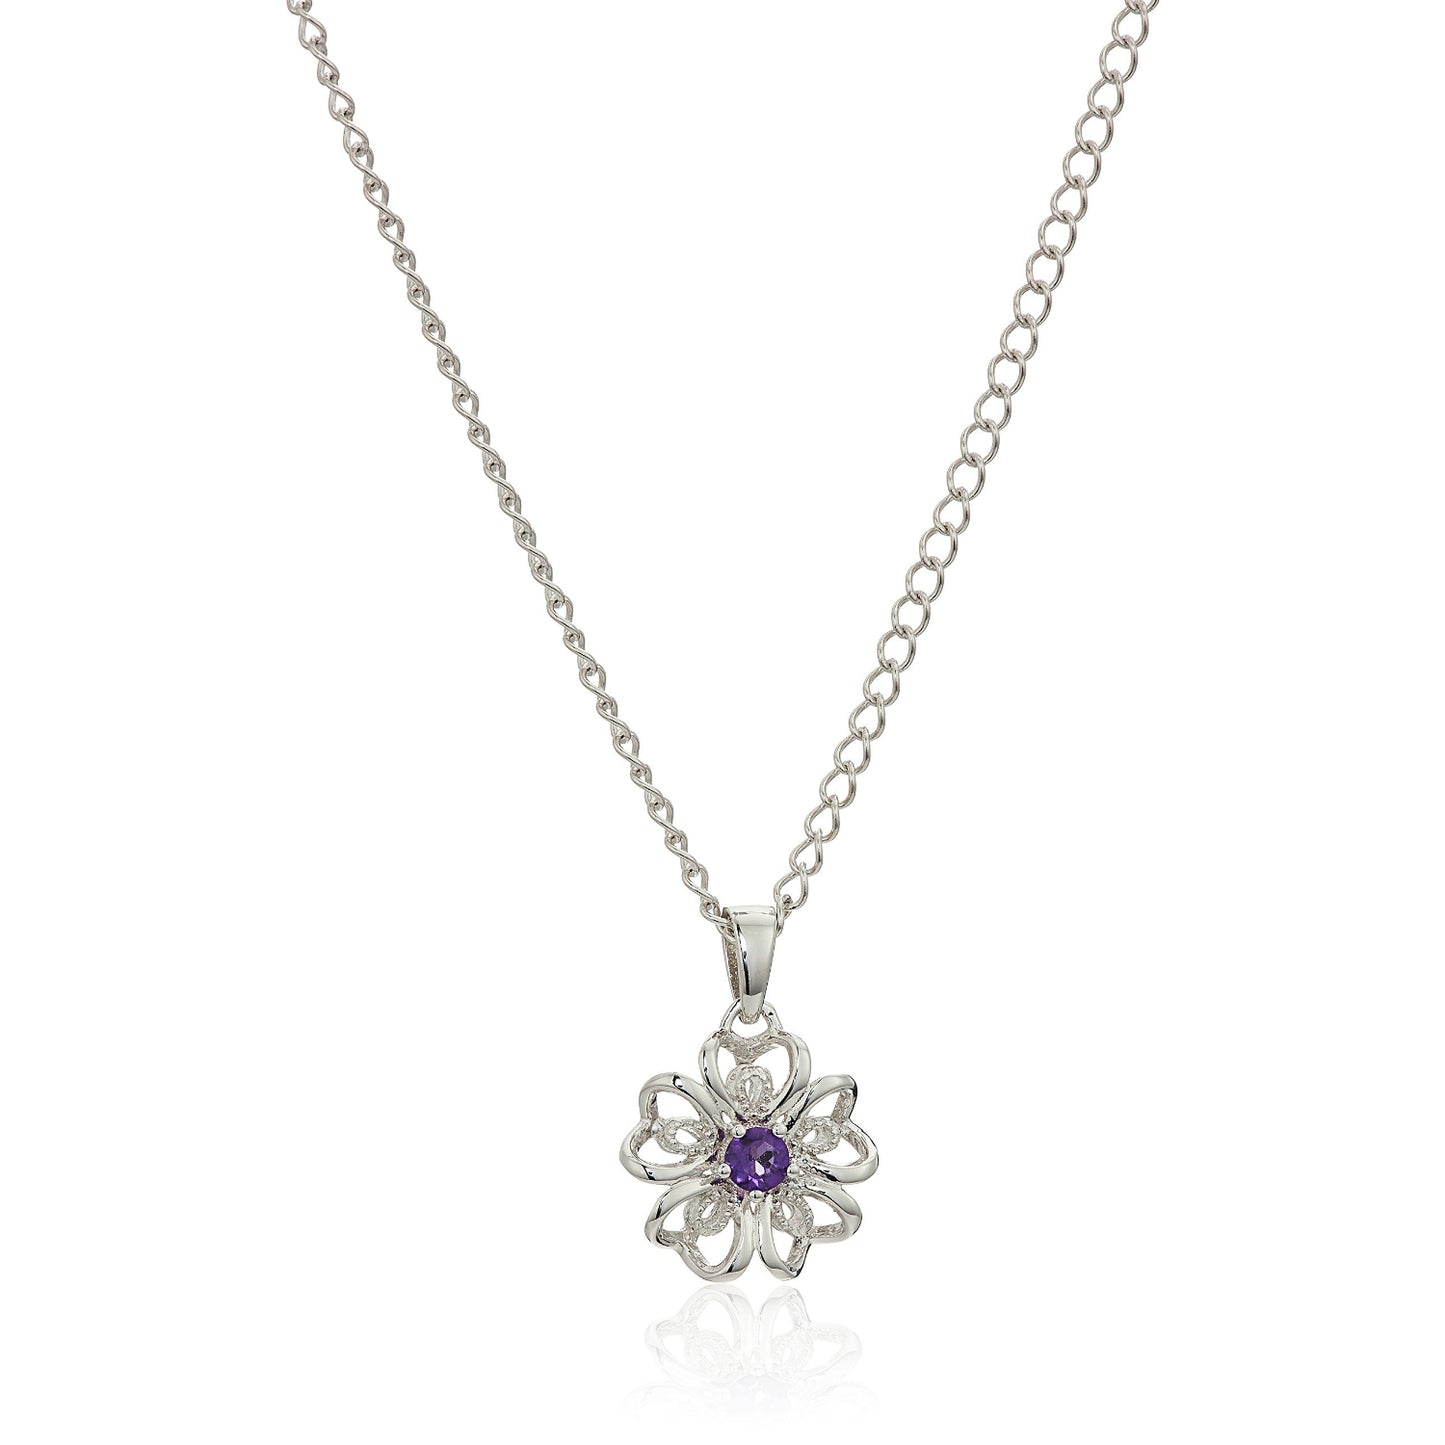 Sterling Silver African Amethyst Flower Pendant Necklace, 18" - Pinctore